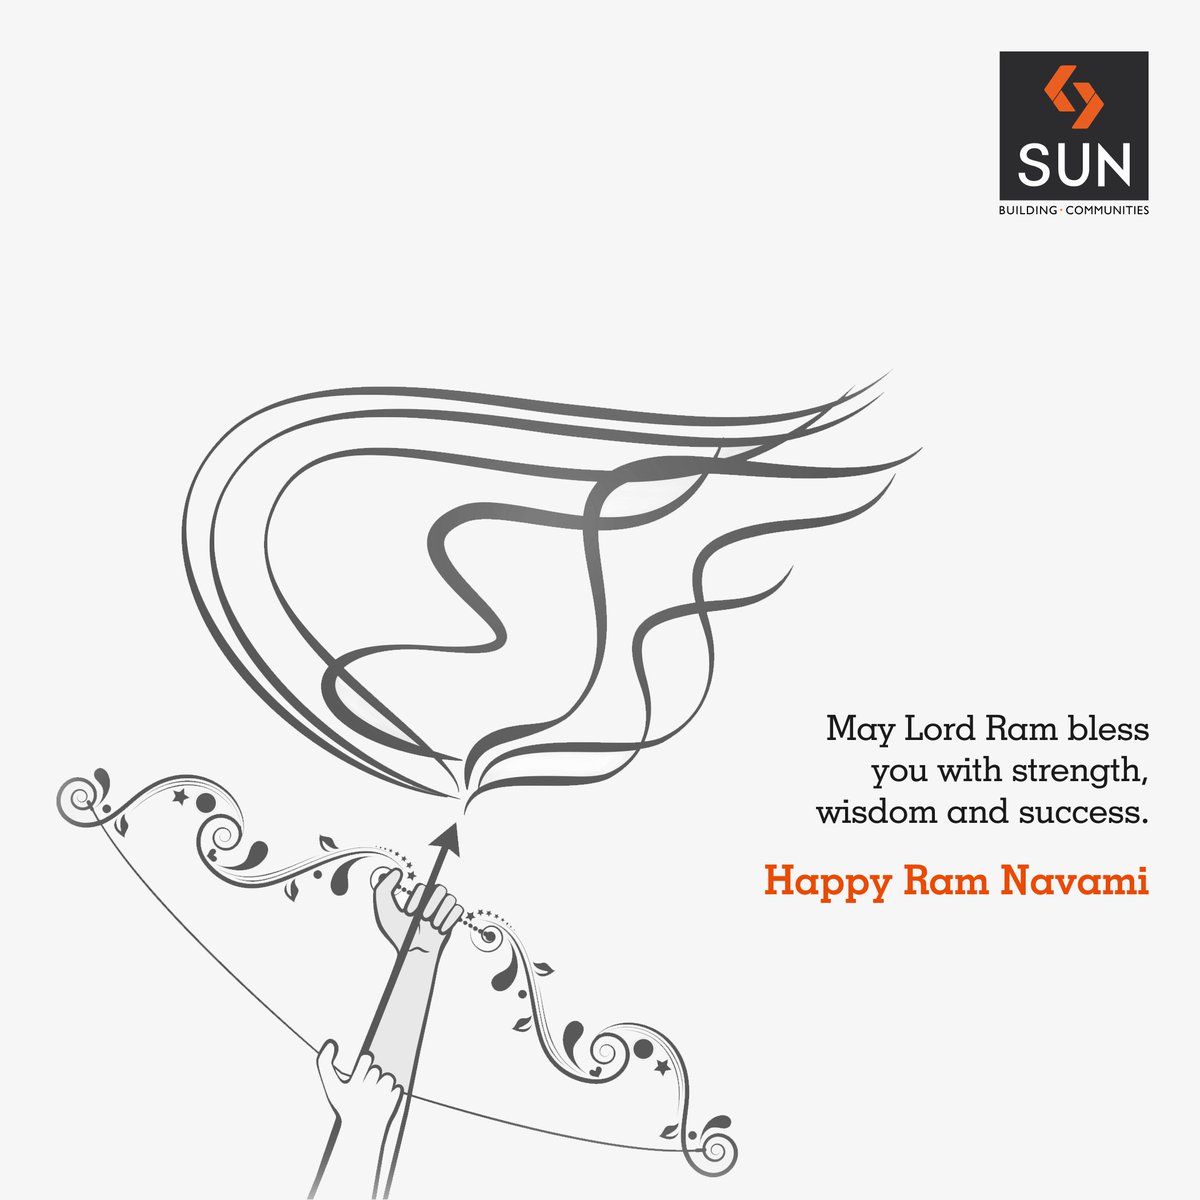 May Lord Ram shower his blessings on you this Ram Navami. https://t.co/OKDwNTfOVQ